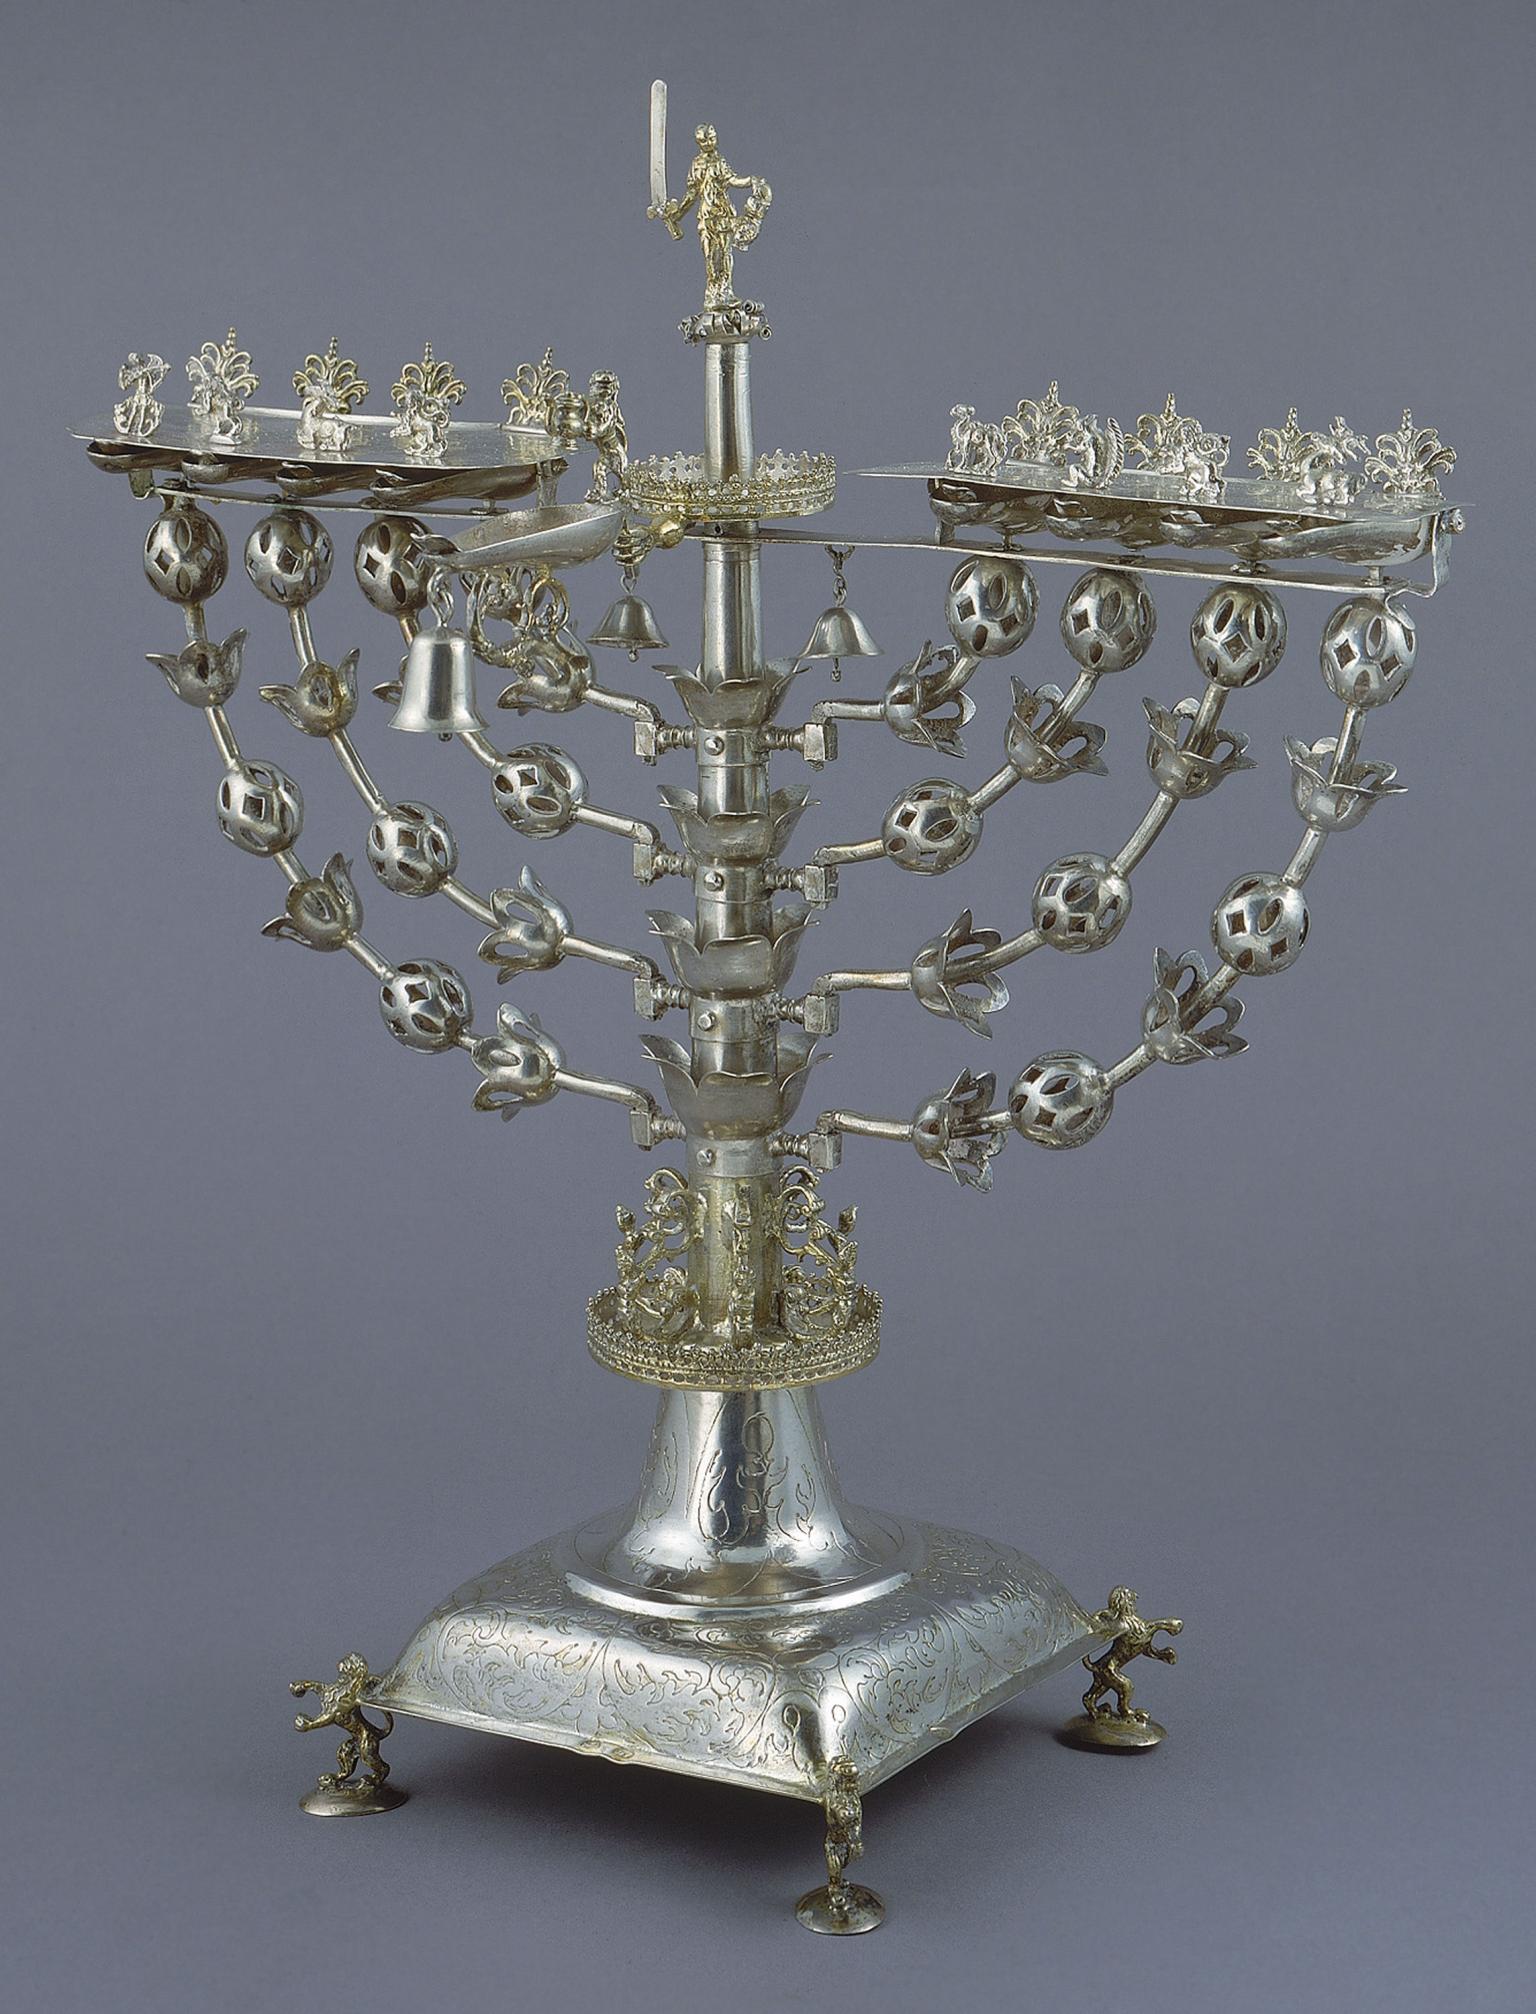 Eight-branched candelabrum with figure on top brandishing sword.